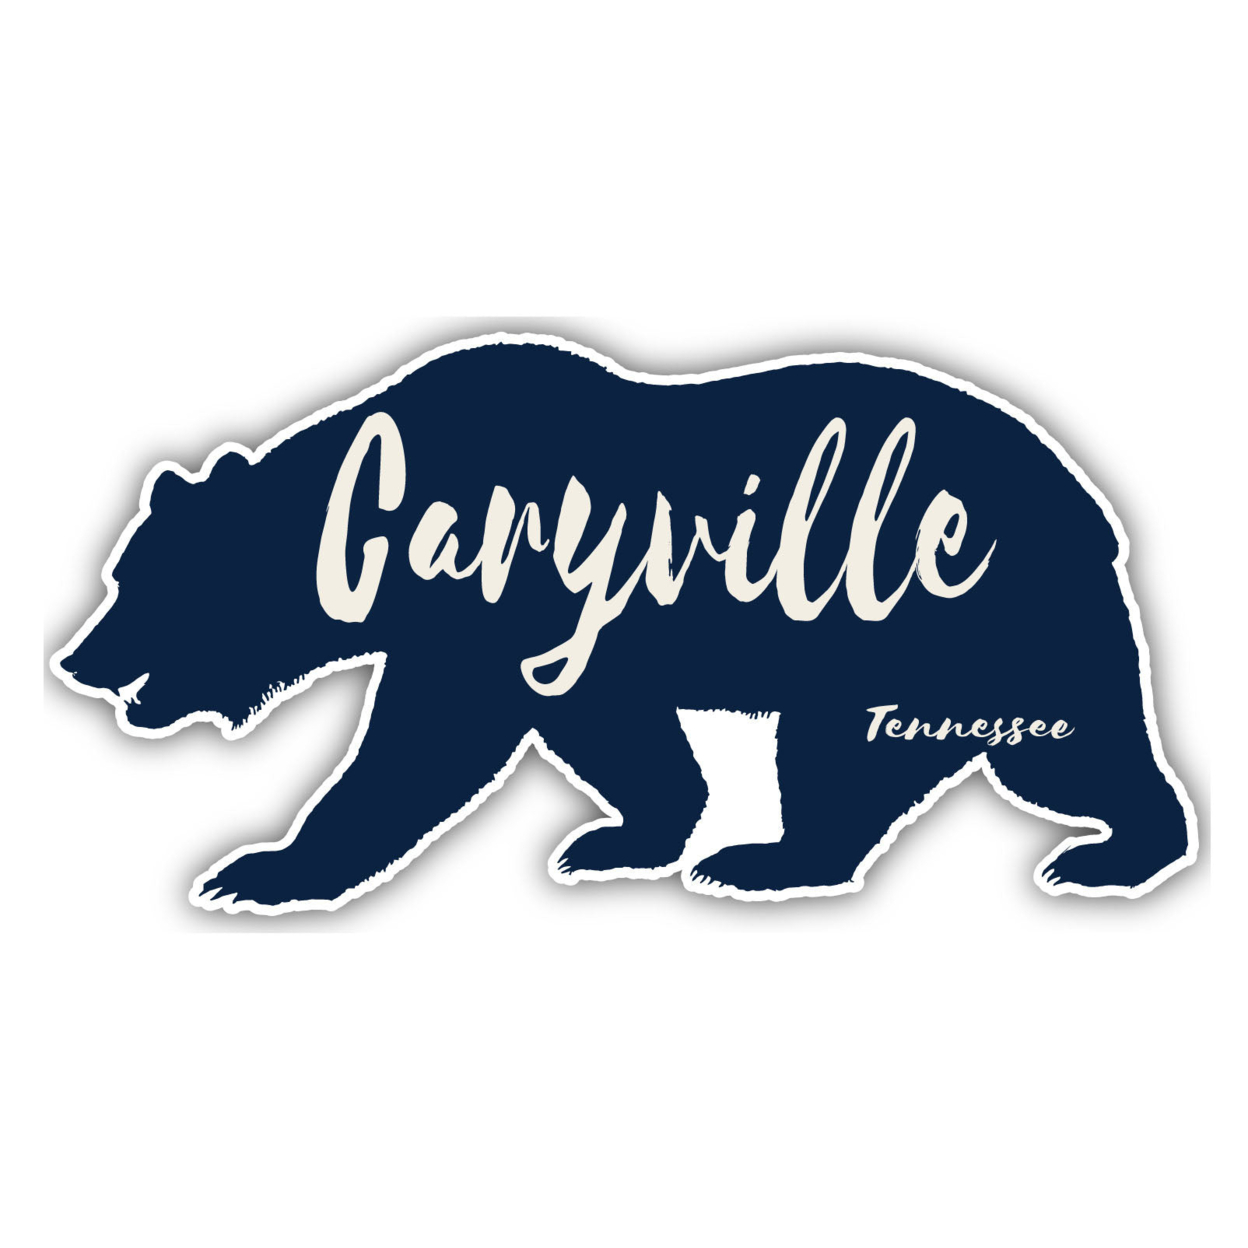 Caryville Tennessee Souvenir Decorative Stickers (Choose Theme And Size) - Single Unit, 6-Inch, Camp Life